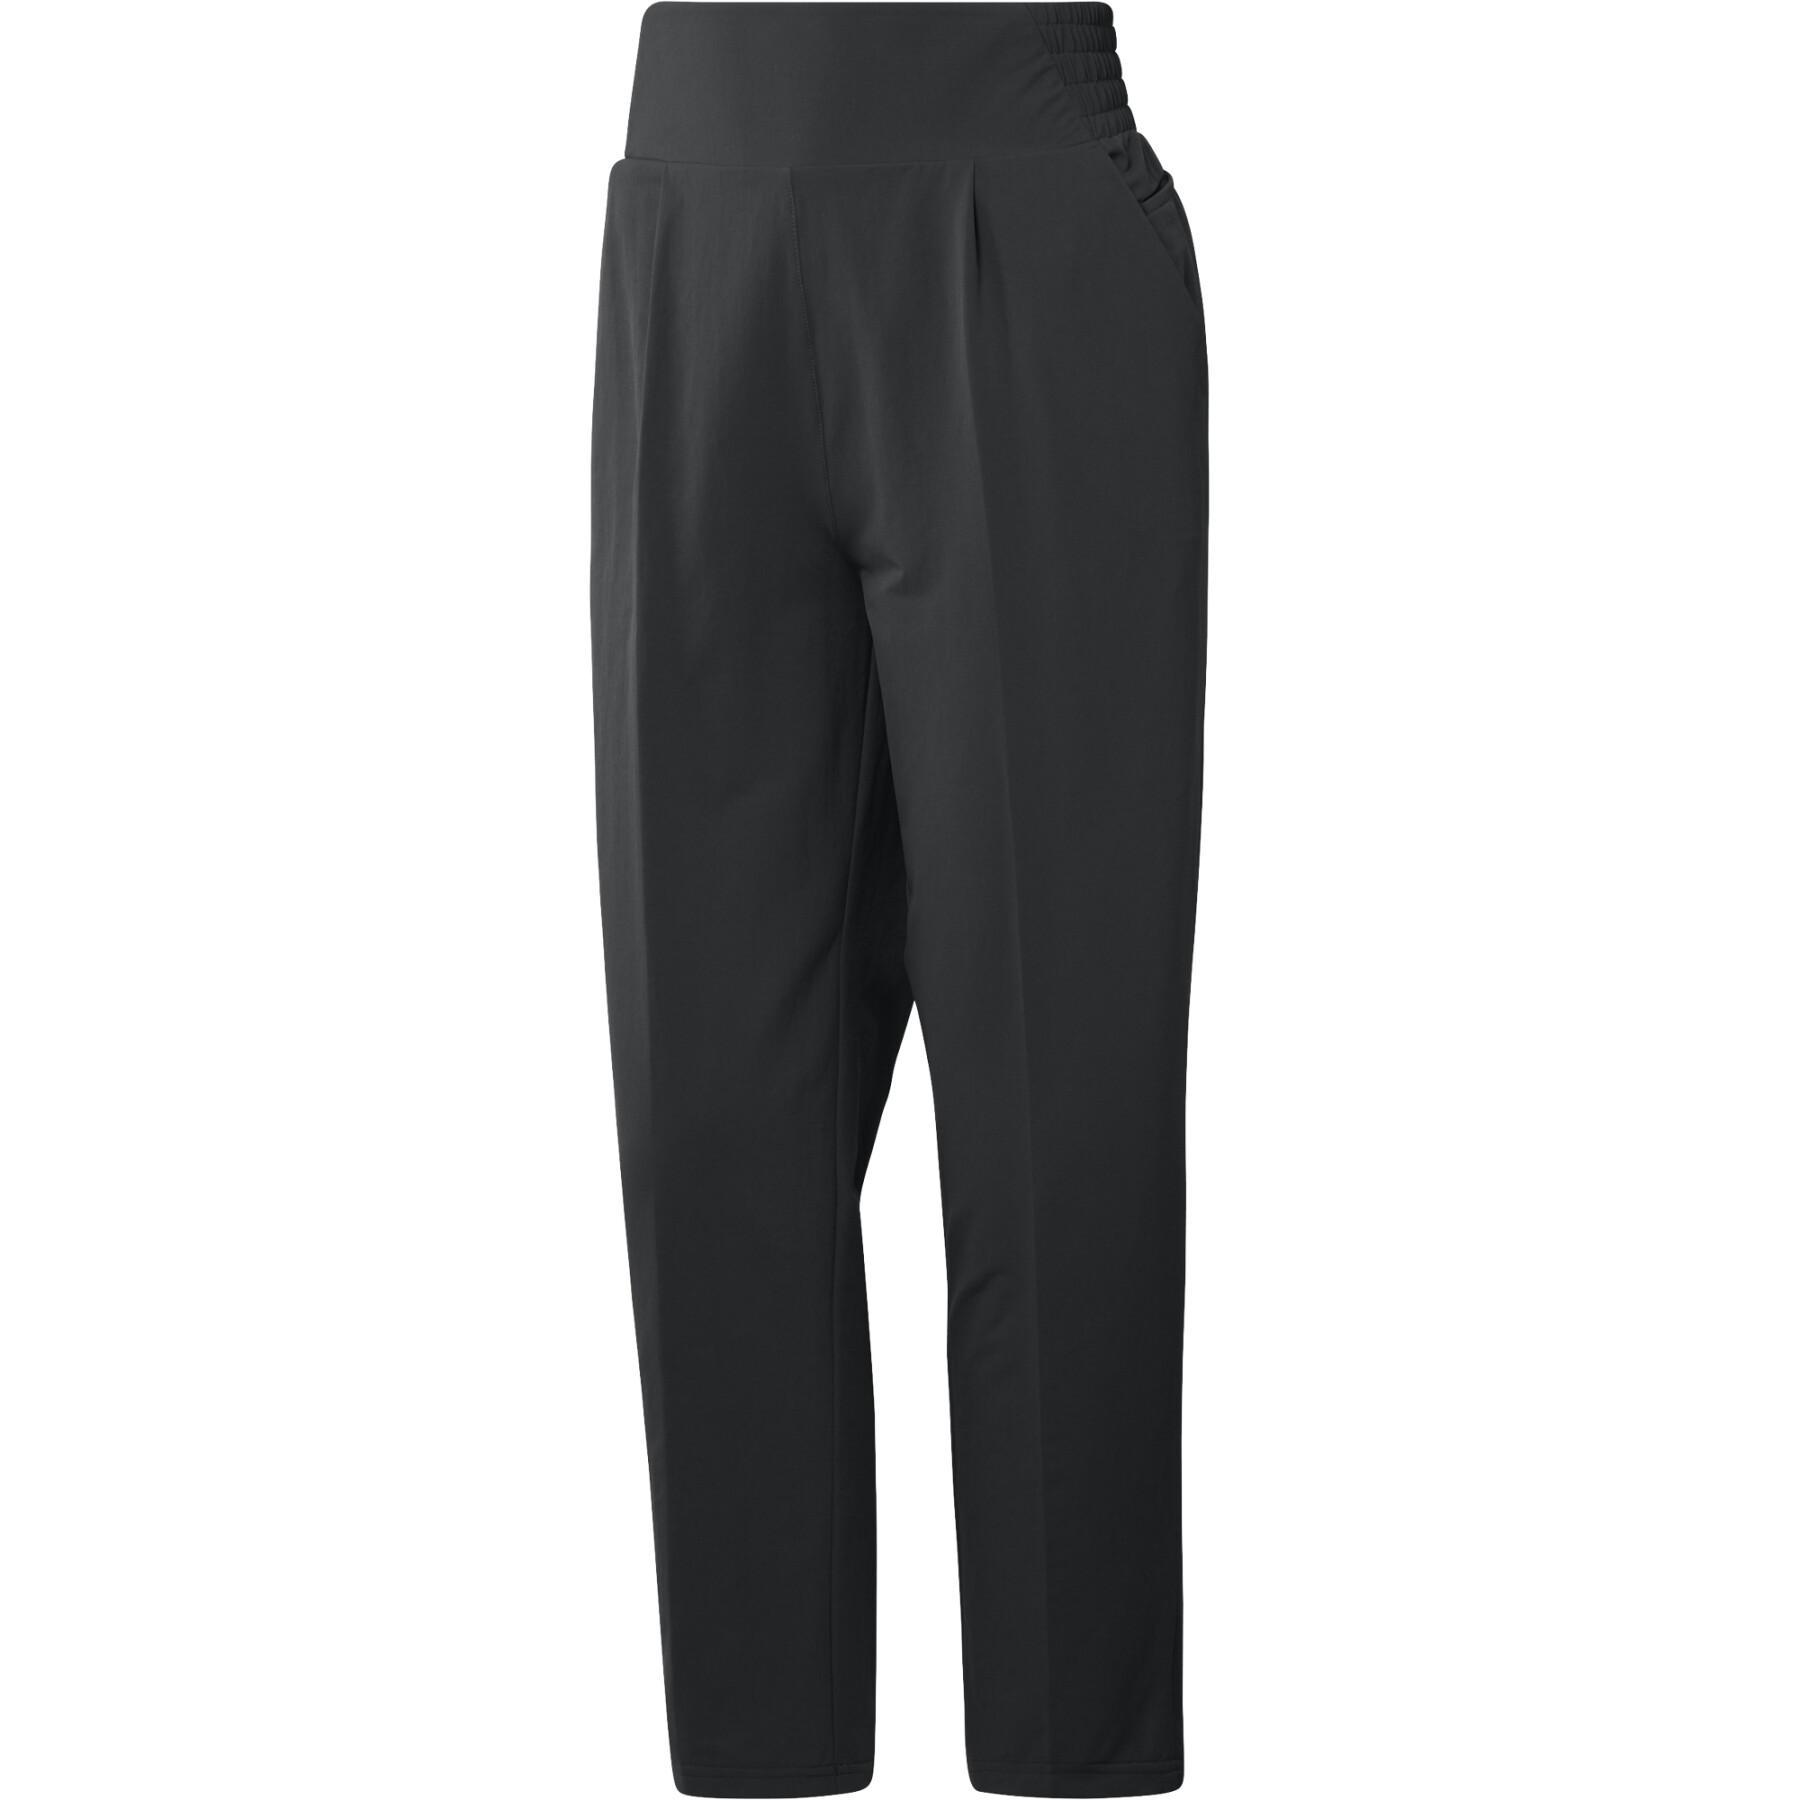 Women's pants adidas Go-To Commuter